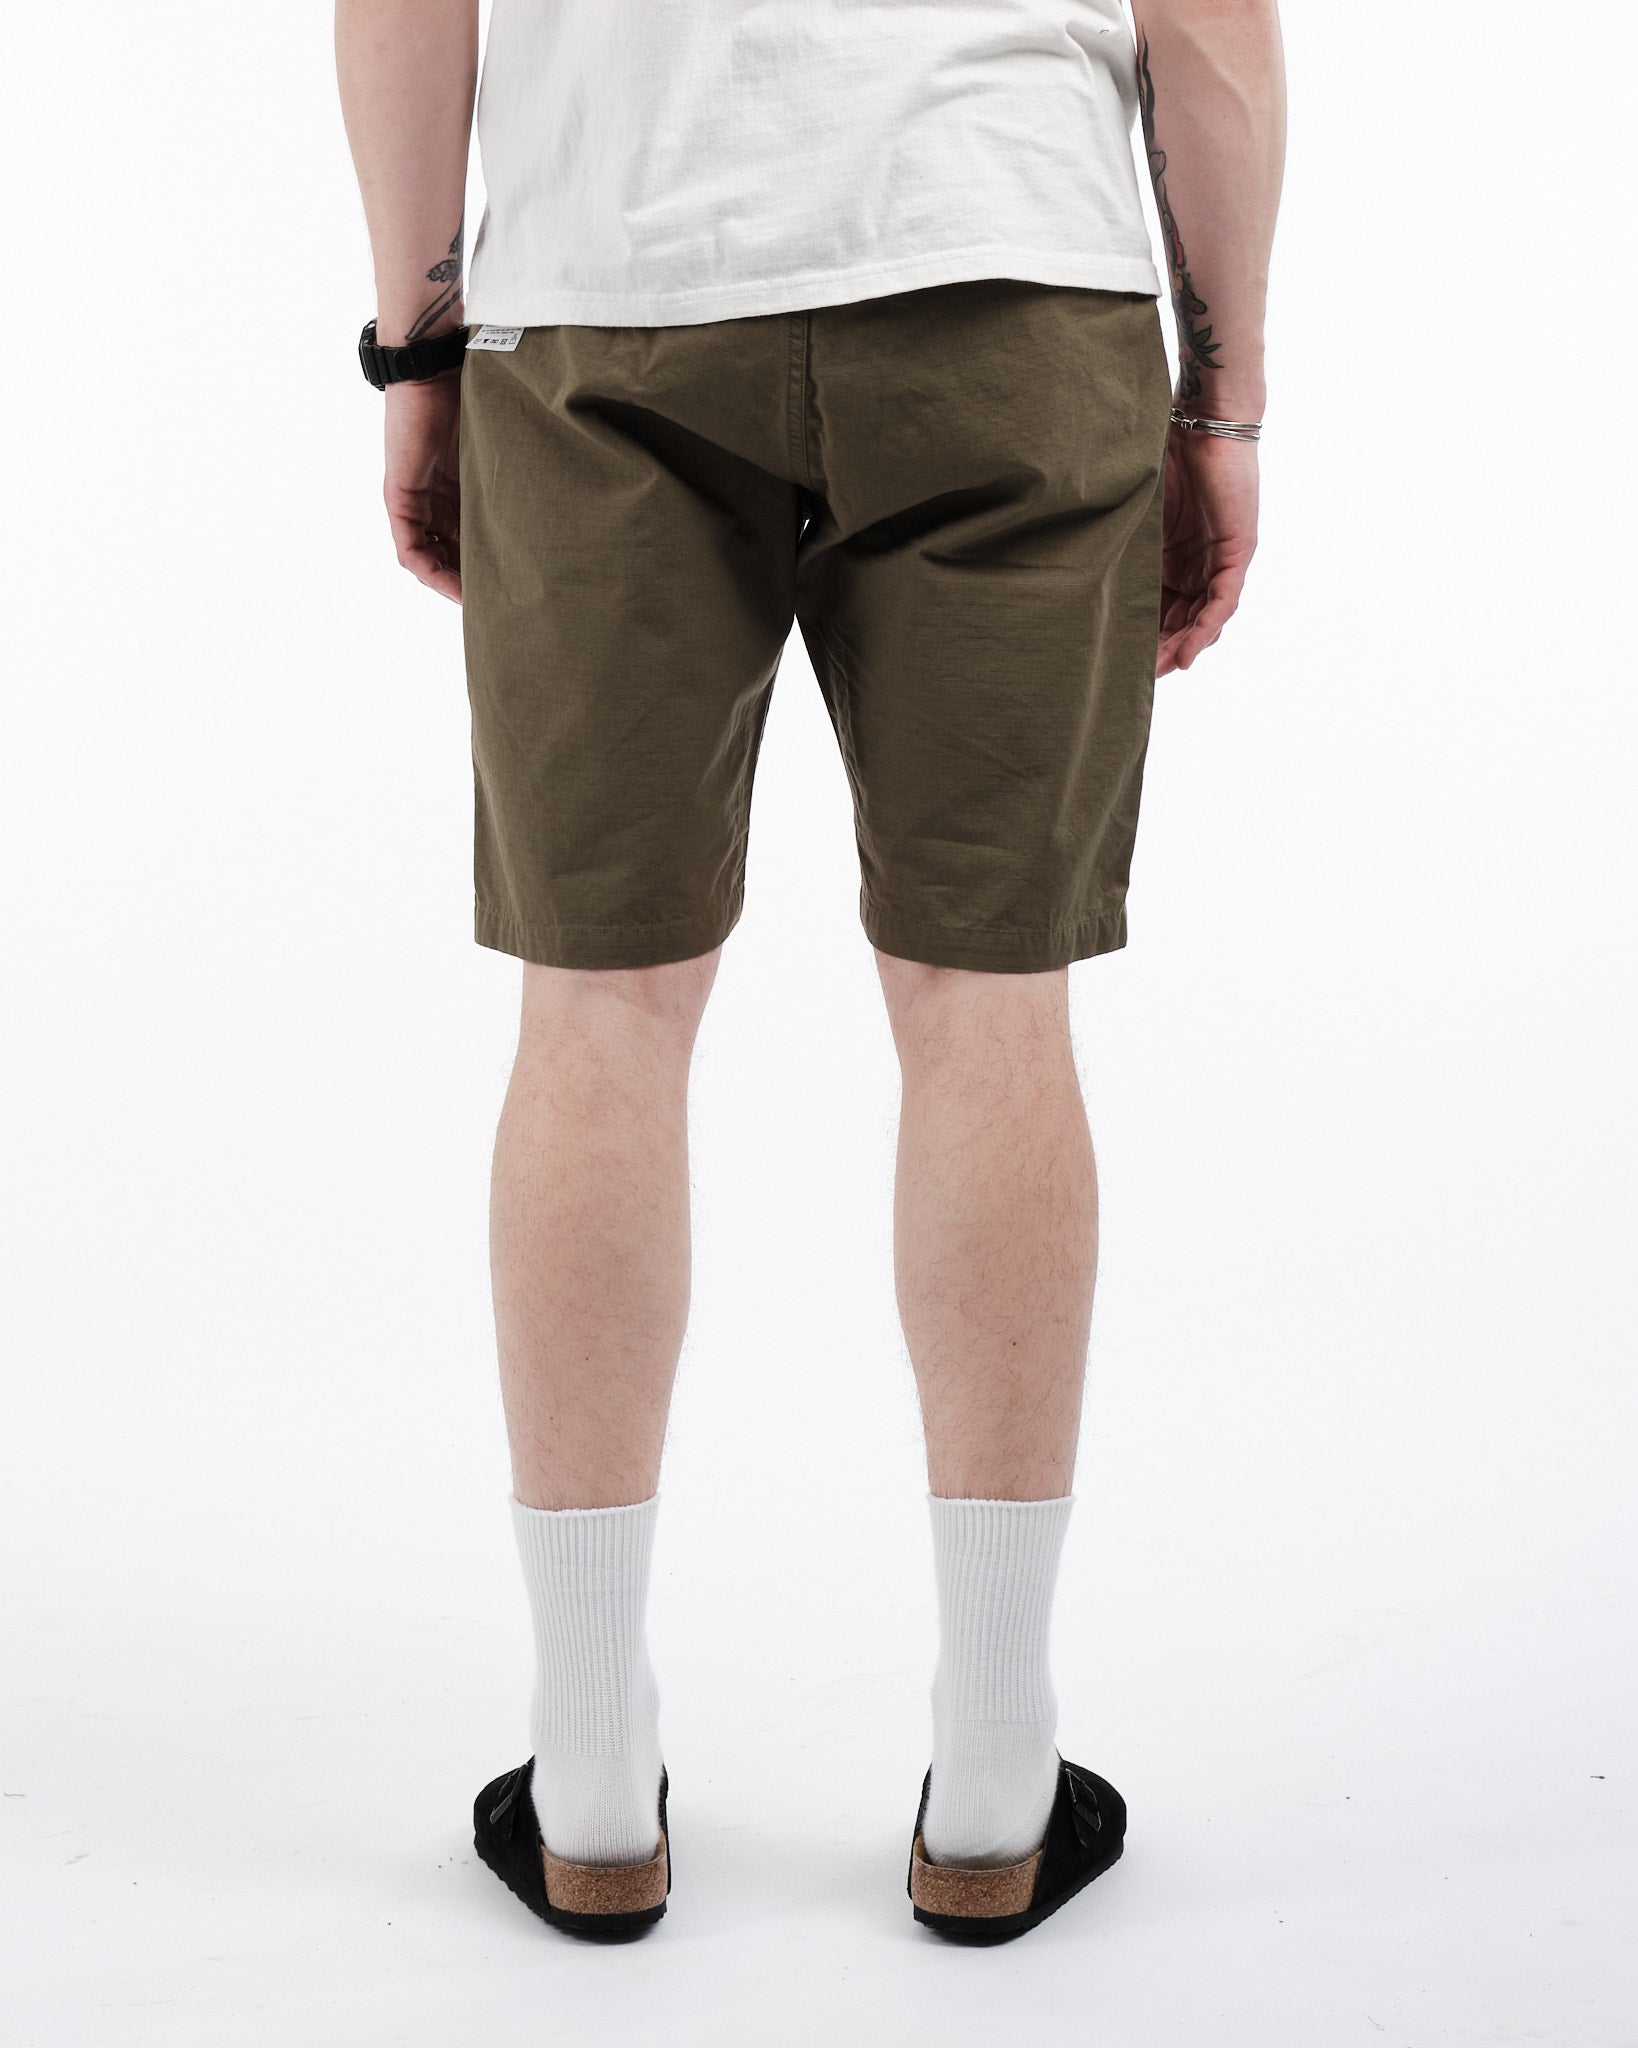 NEW YORKER SHORTS ARMY GREEN